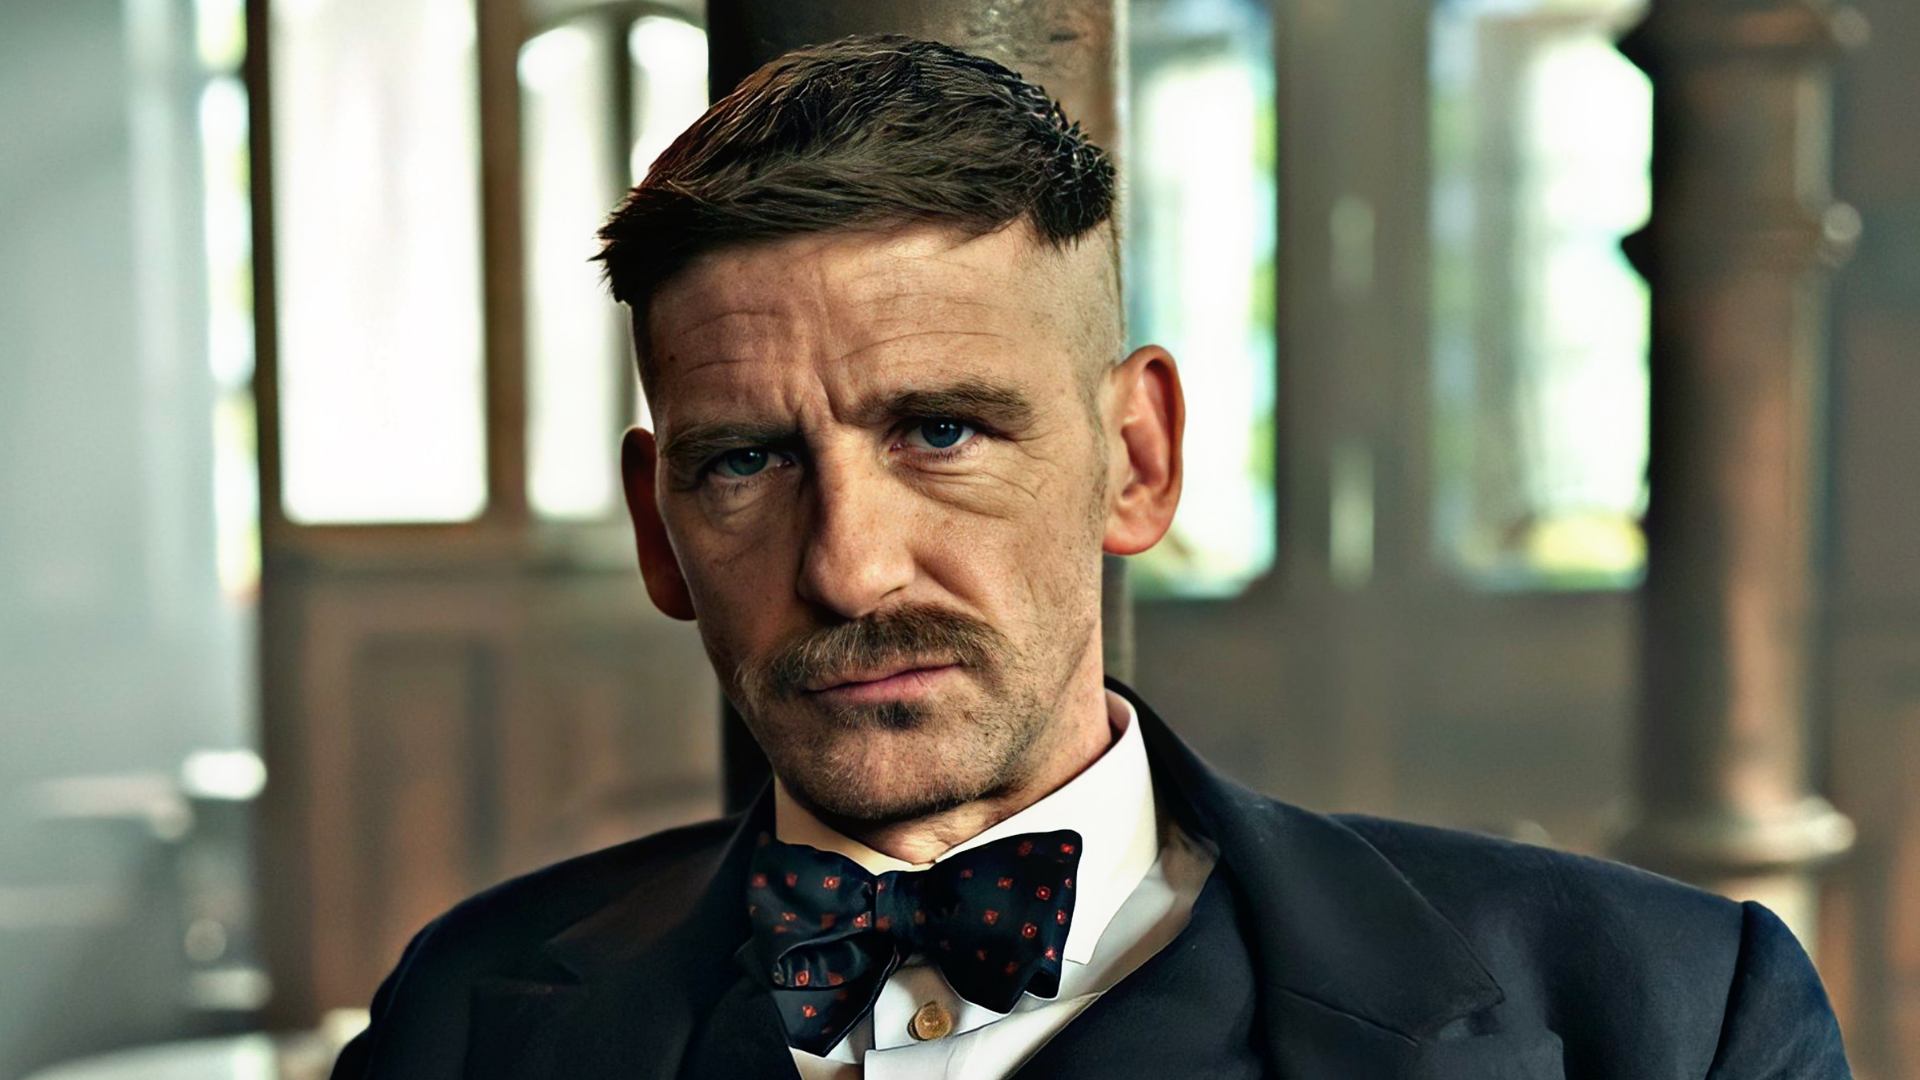 Peaky Blinders Cast Facts - 33 Things You Never Knew About The Cast Of Peaky Blinders